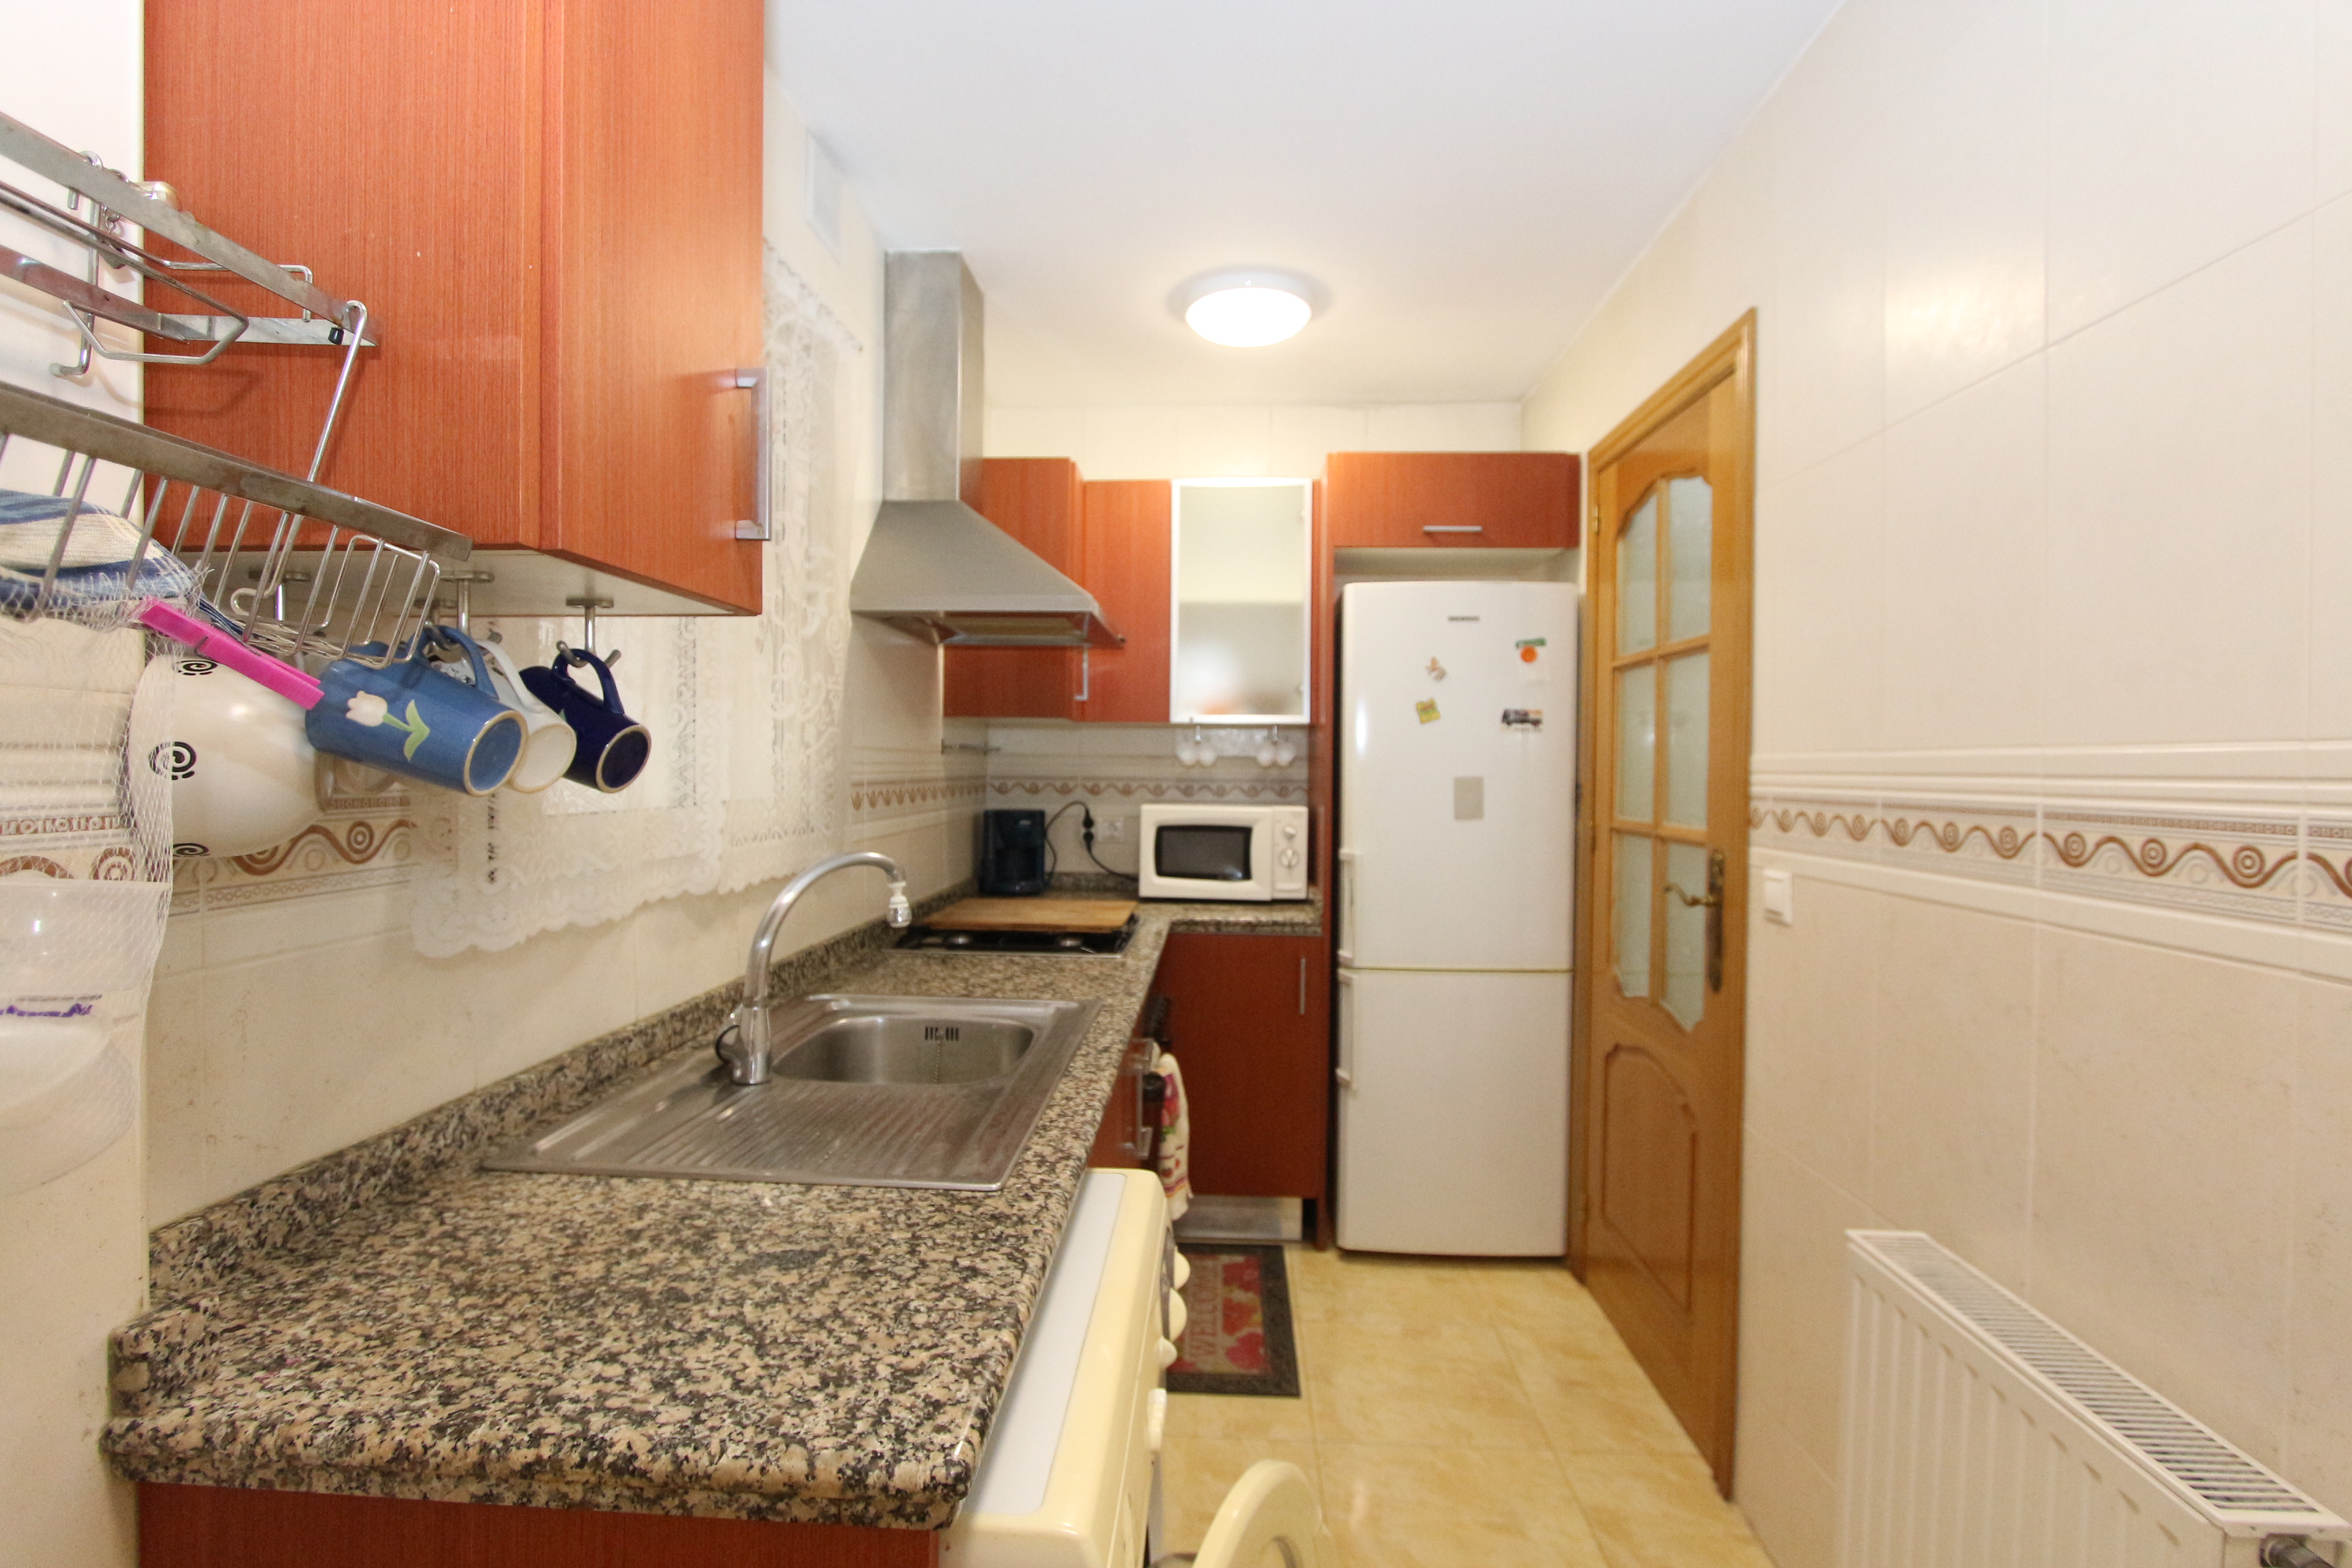 Spacious apartment with pool for sale in the center of Calpe